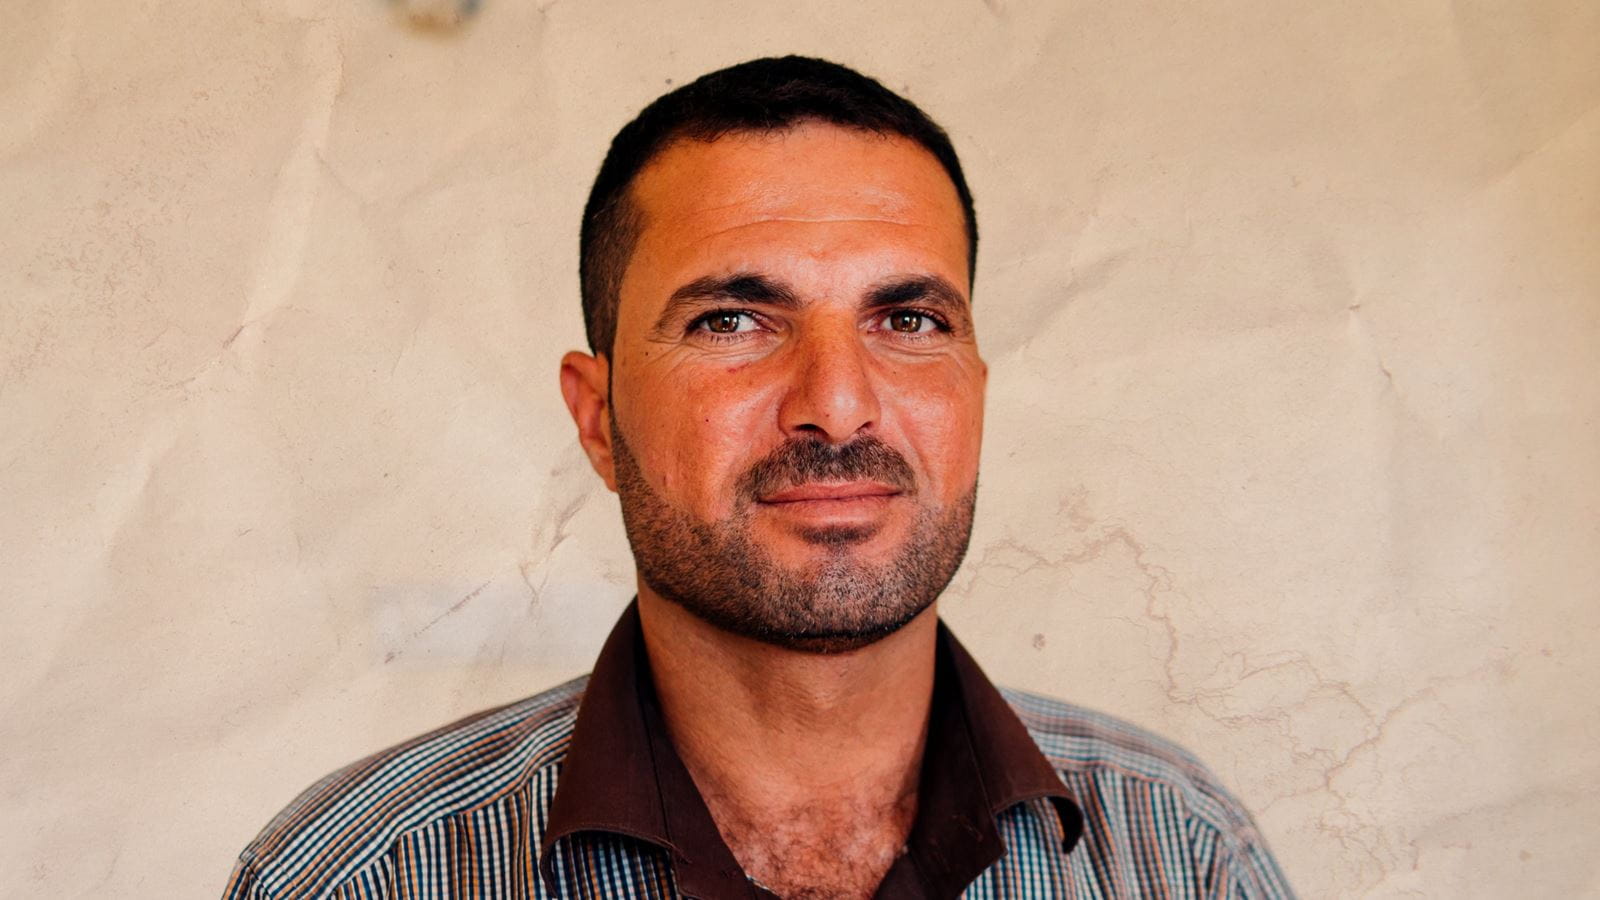 Abdullah, a barber from Iraq, shares his story of rebuilding his life after escaping armed conflict.